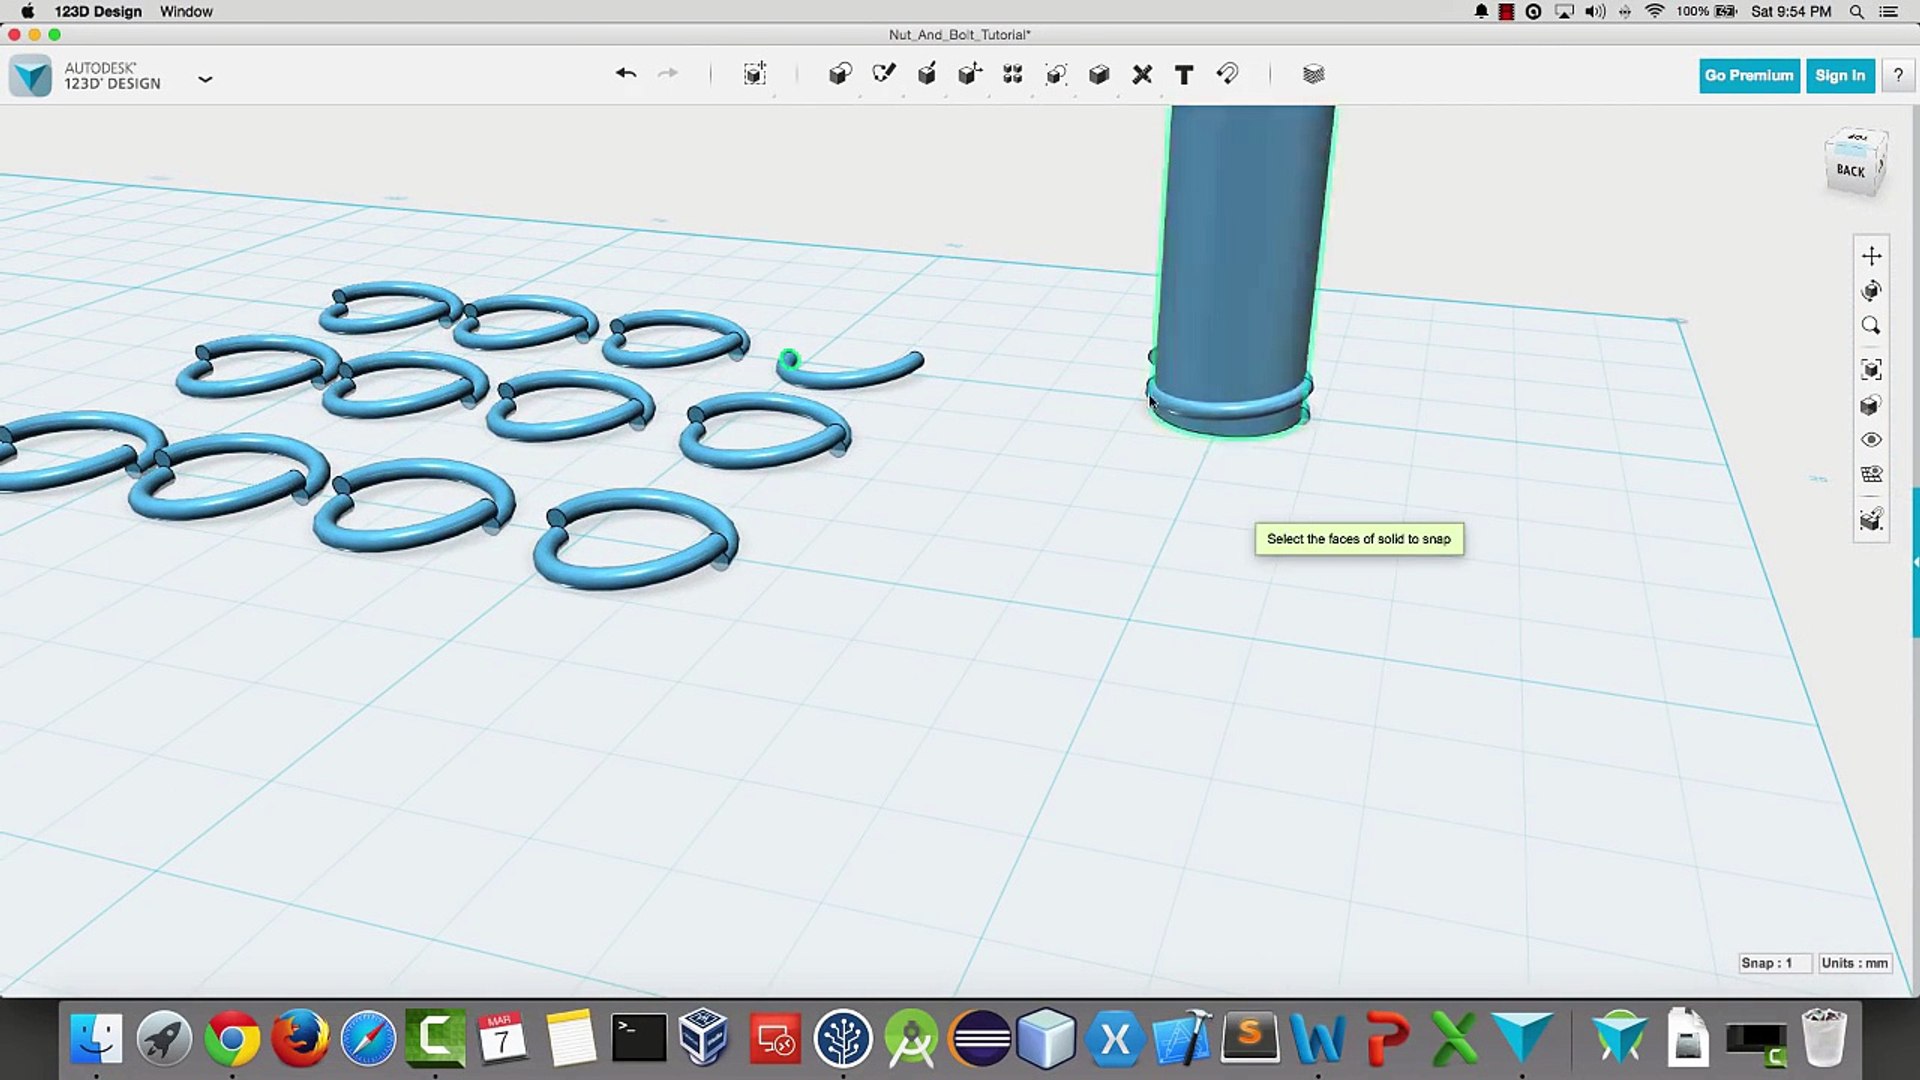 Create A Nut And Bolt In 123d Design For 3d Printing Tutorial Video Dailymotion